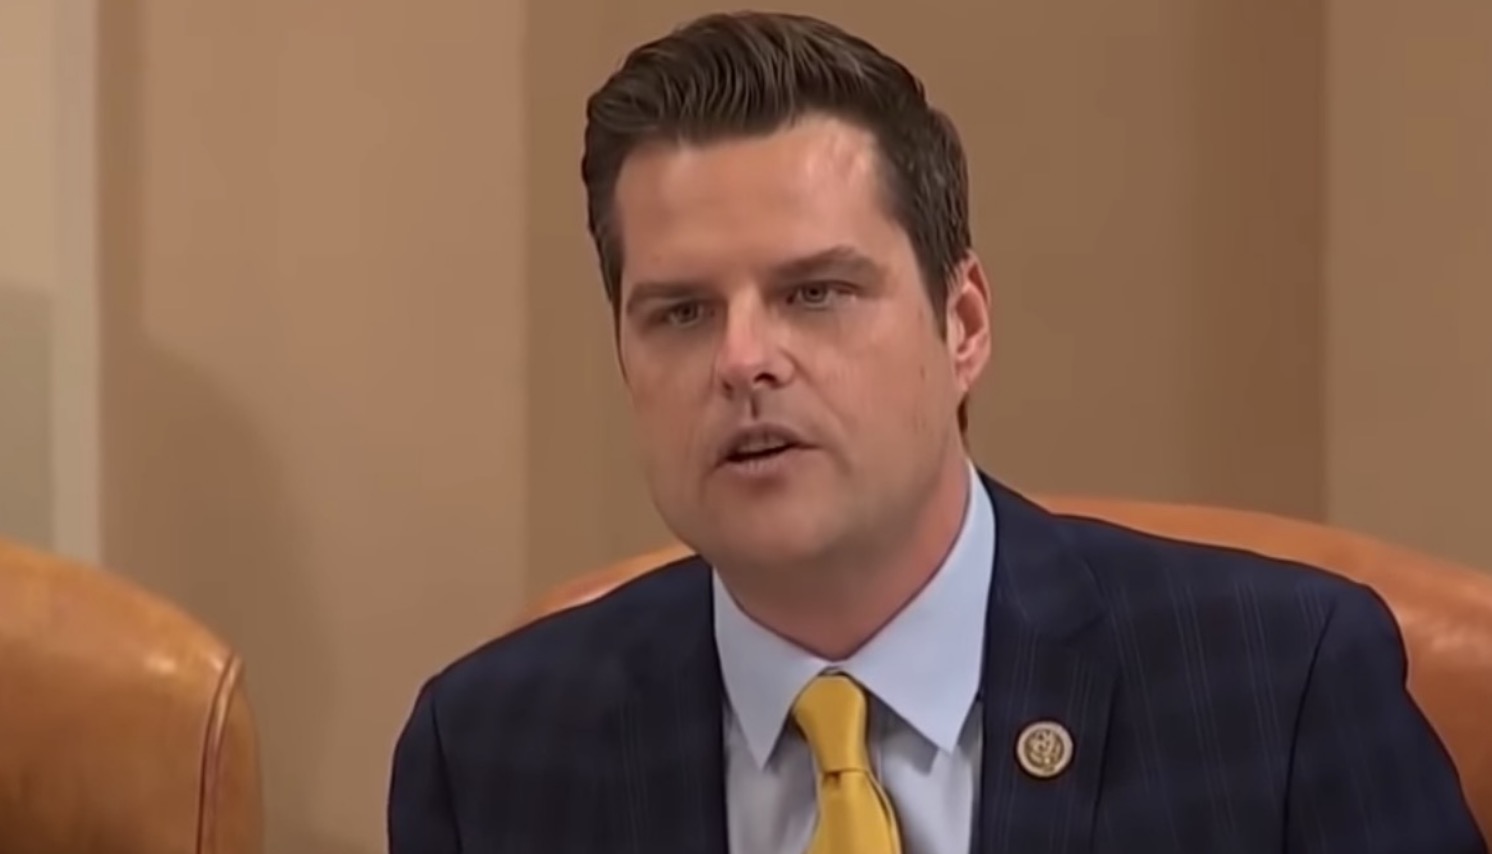 Florida Politics' Juicy Read - 4.24.20 - Don't Mess With Matt Gaetz - Ashley Moody Sues- Trump Delivers For Oil Industry - Nikki Fried & The Re-Open Florida TF